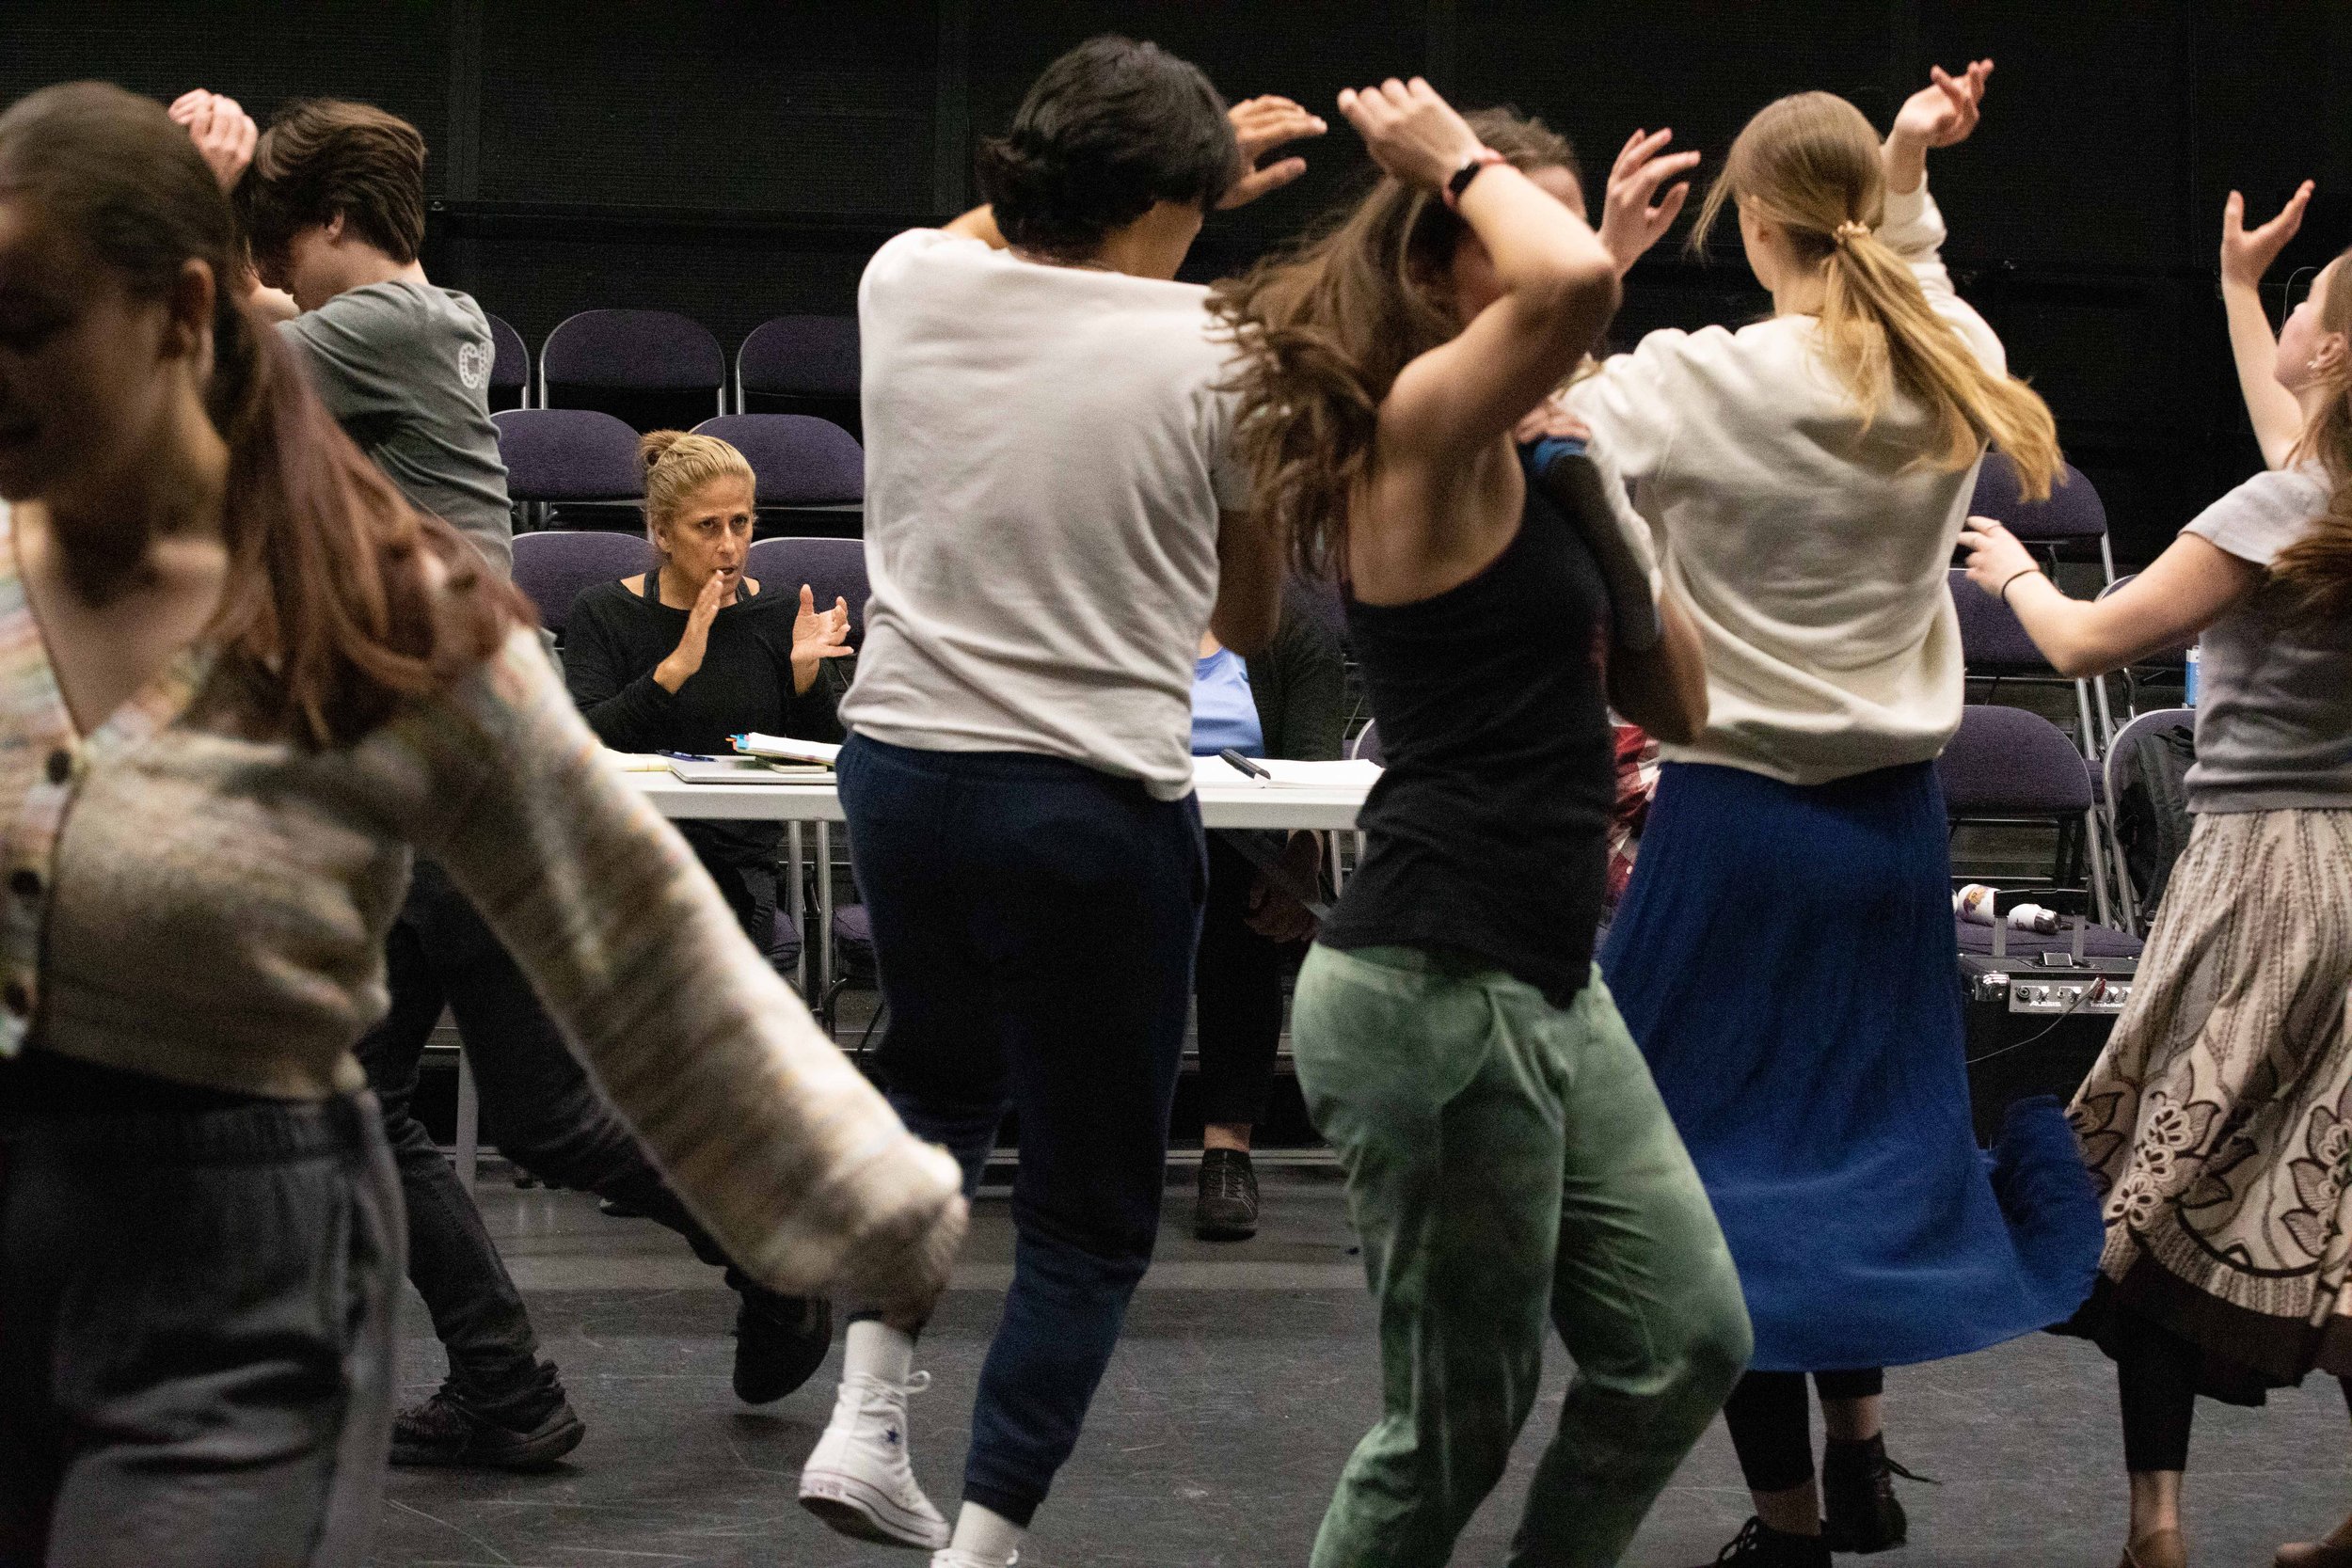  SMC Theater Choreographer Cihtli Ocampo clapping the tempo while the students perform at a class rehearsal for the musical “Hunchback of Notredame”. Theater Arts building at SMC main campus, Santa Monica, Calif. March Tuesday 7, 2023. (Jorge Devotto